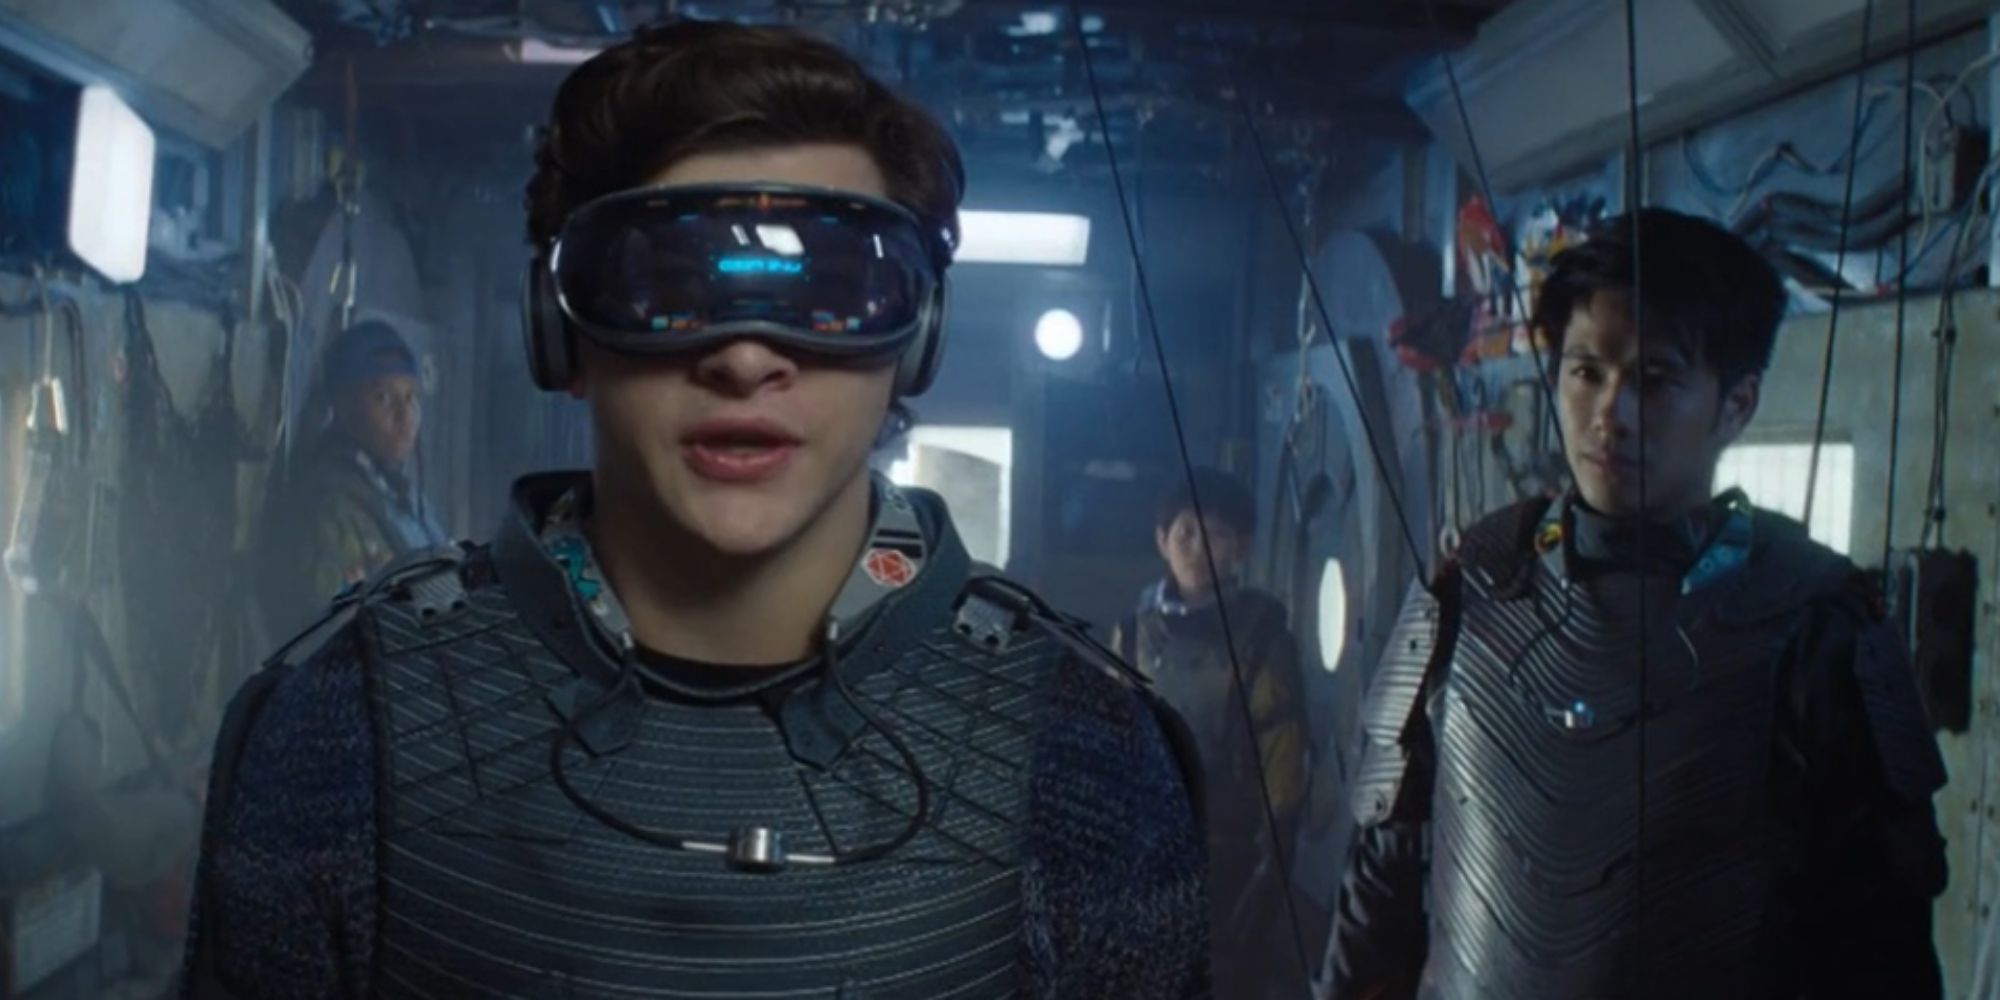 A Ready Player One Sequel Has An Obvious Path Forward (But It Shouldn't Take It)